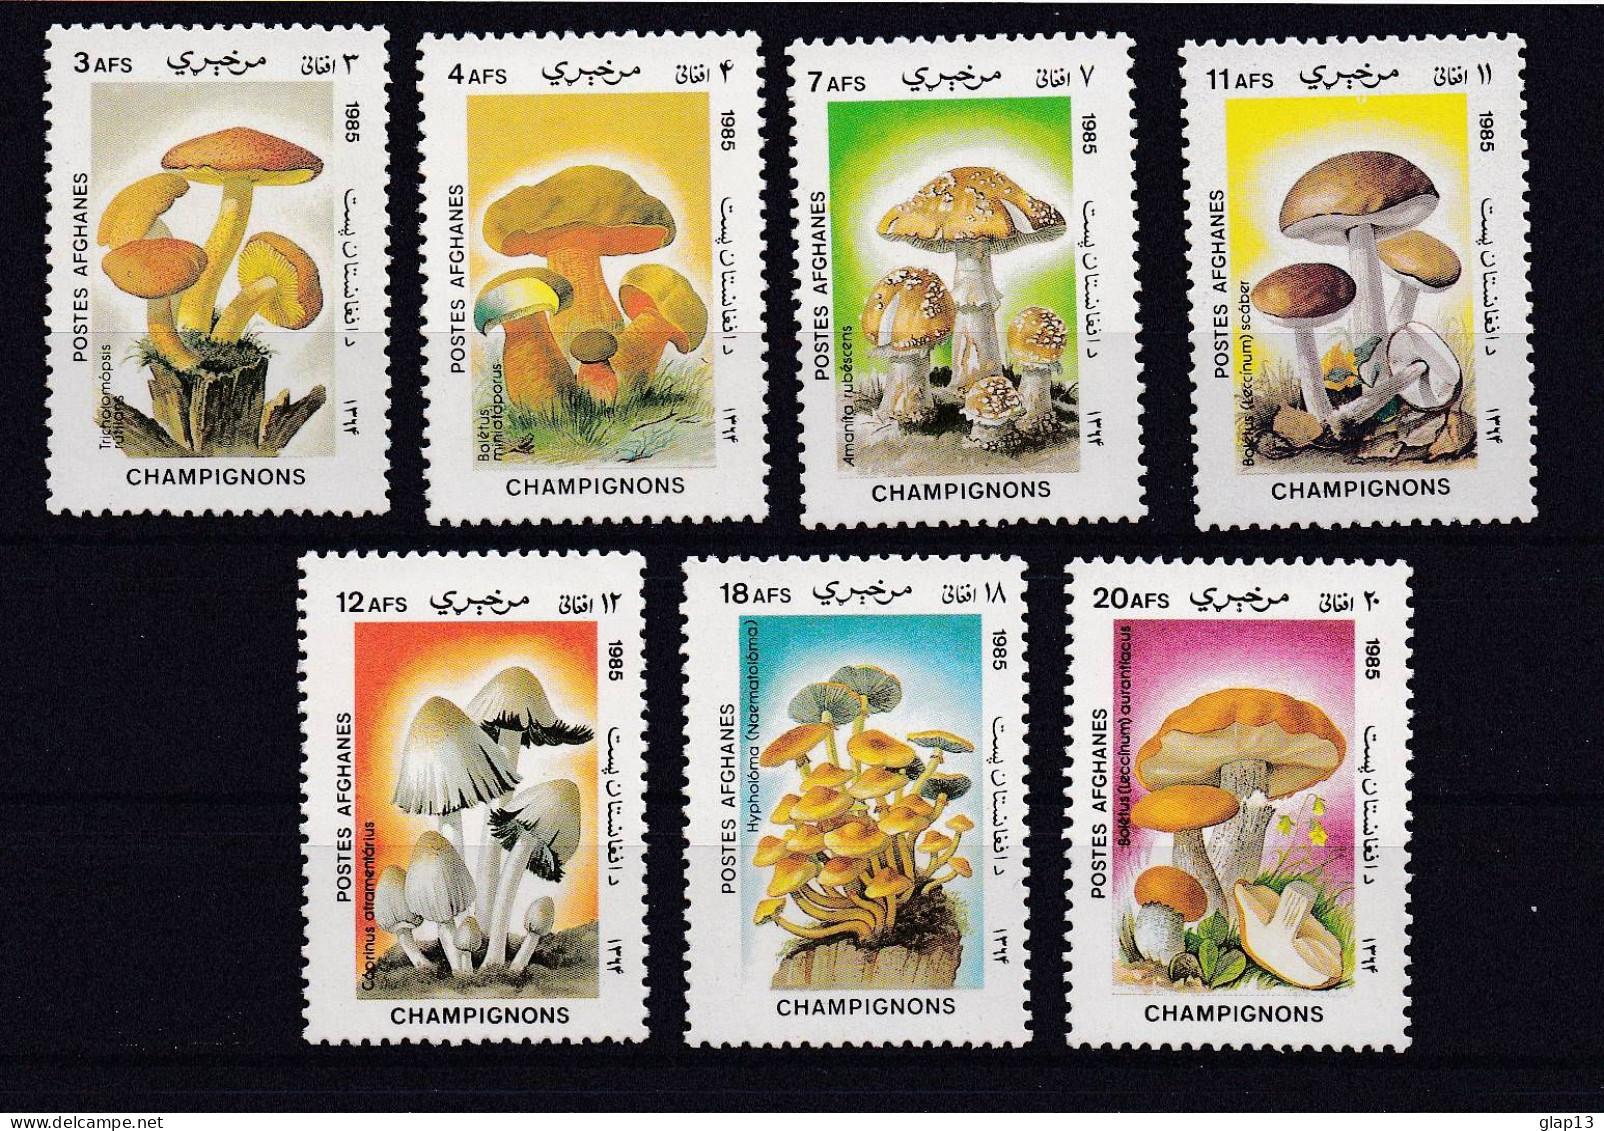 AFGHANISTAN 1985 TIMBRE N°1276/82 NEUF** CHAMPIGNONS - Afghanistan